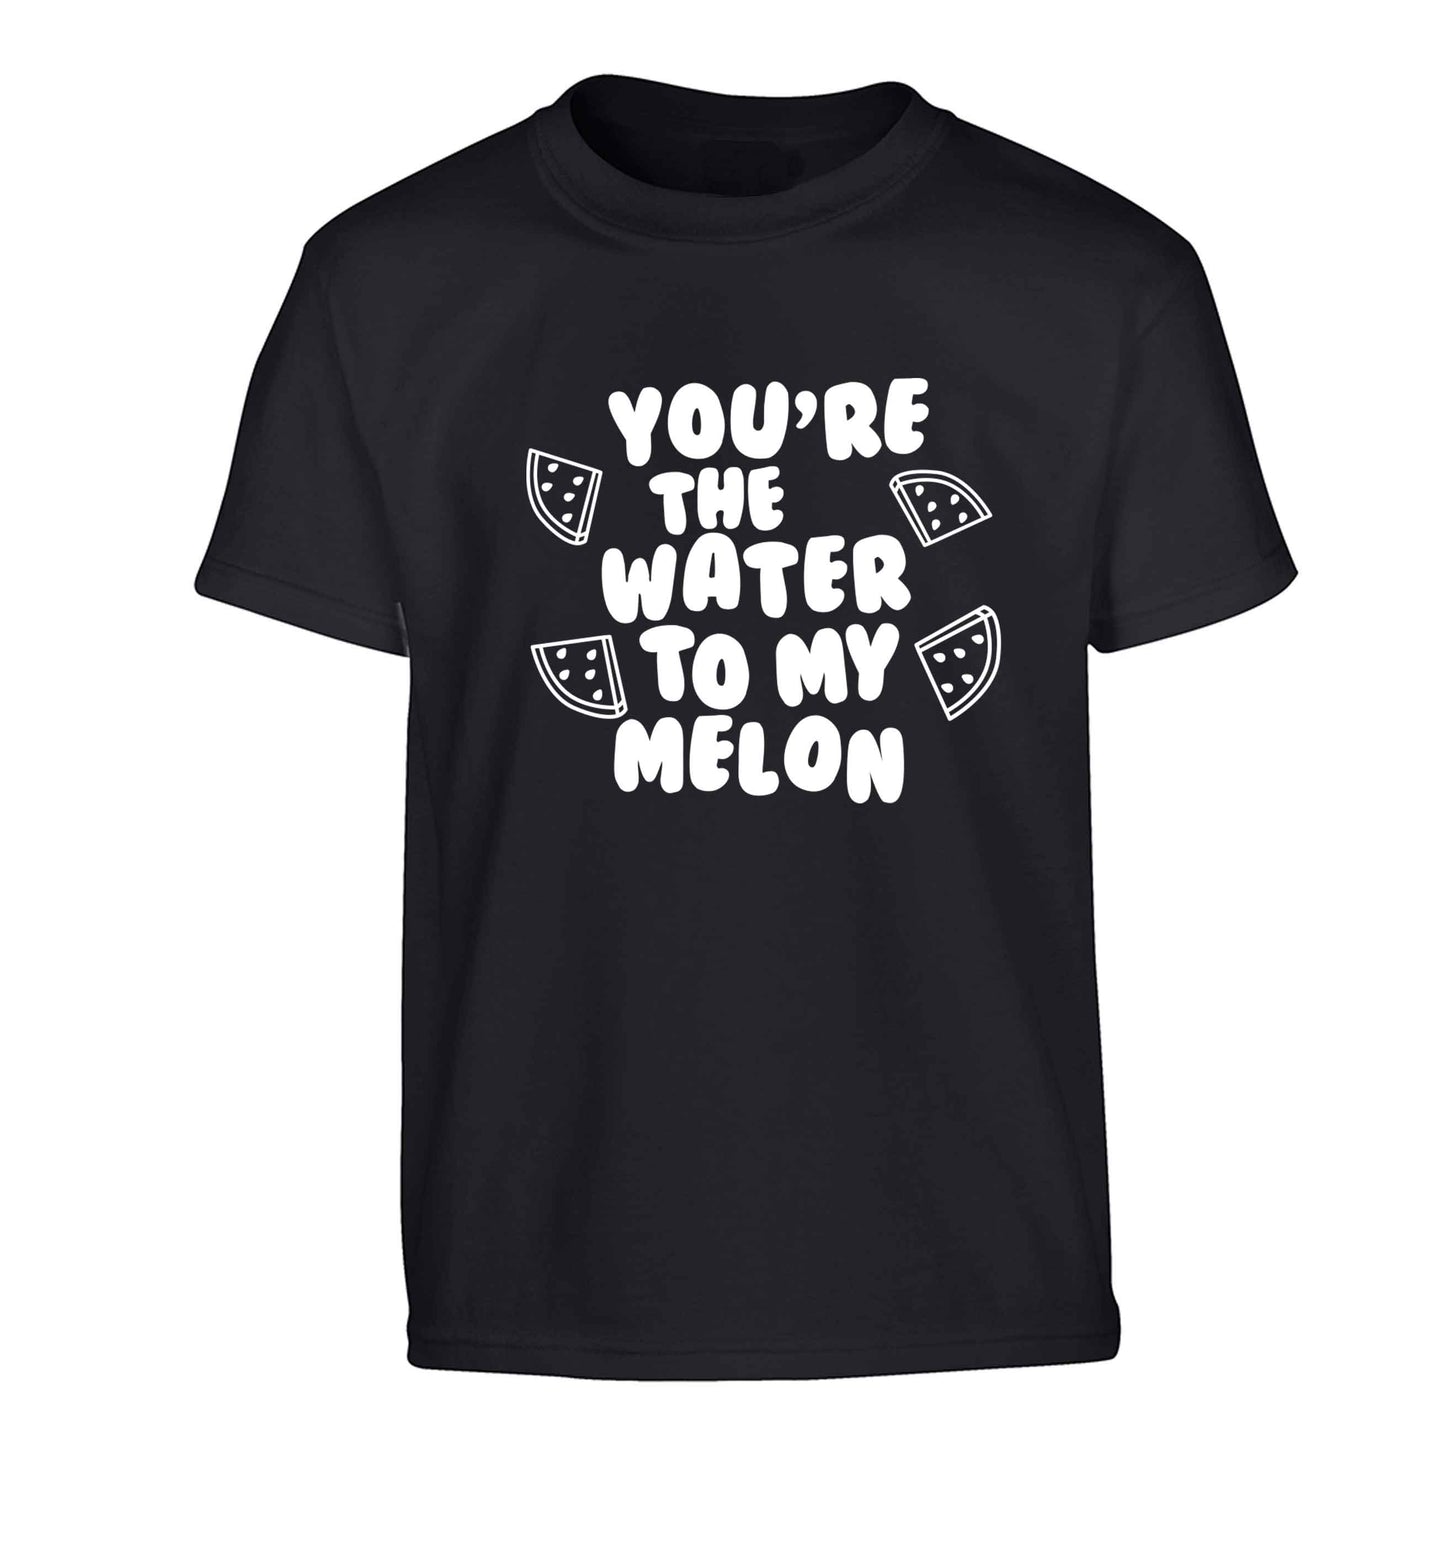 You're the water to my melon Children's black Tshirt 12-13 Years